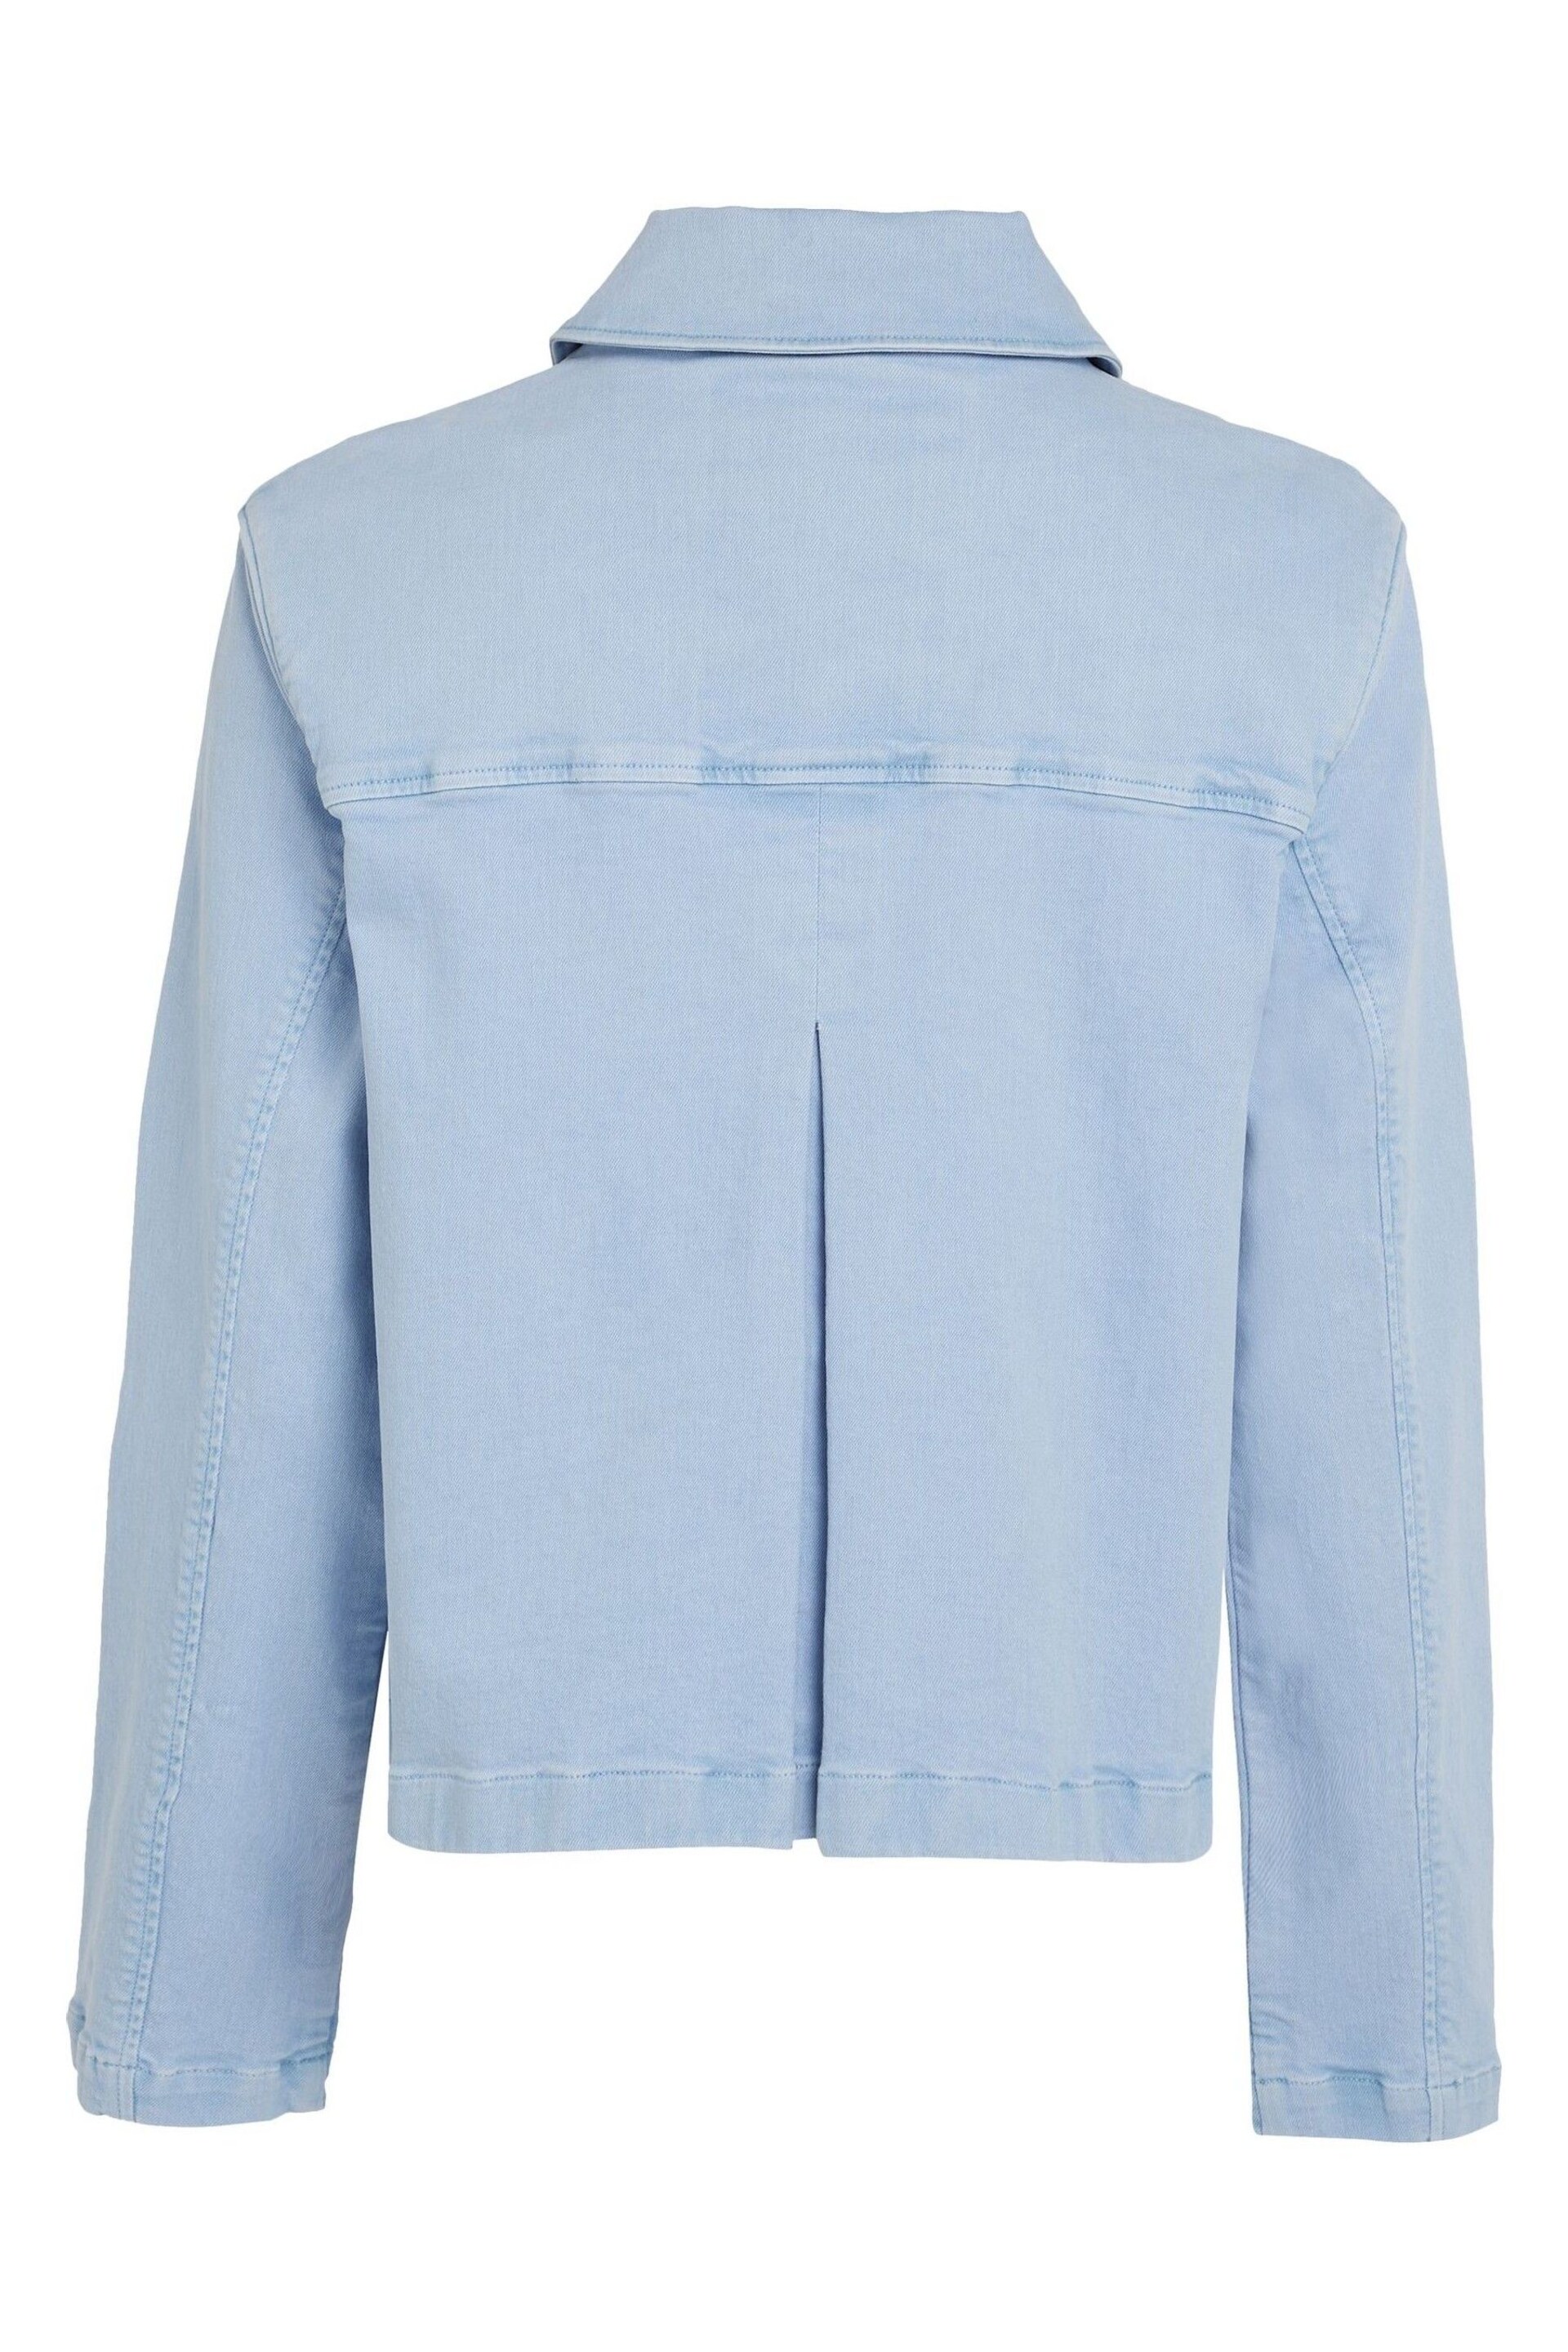 Tommy Jeans Cotton Blue Jacket - Image 5 of 6